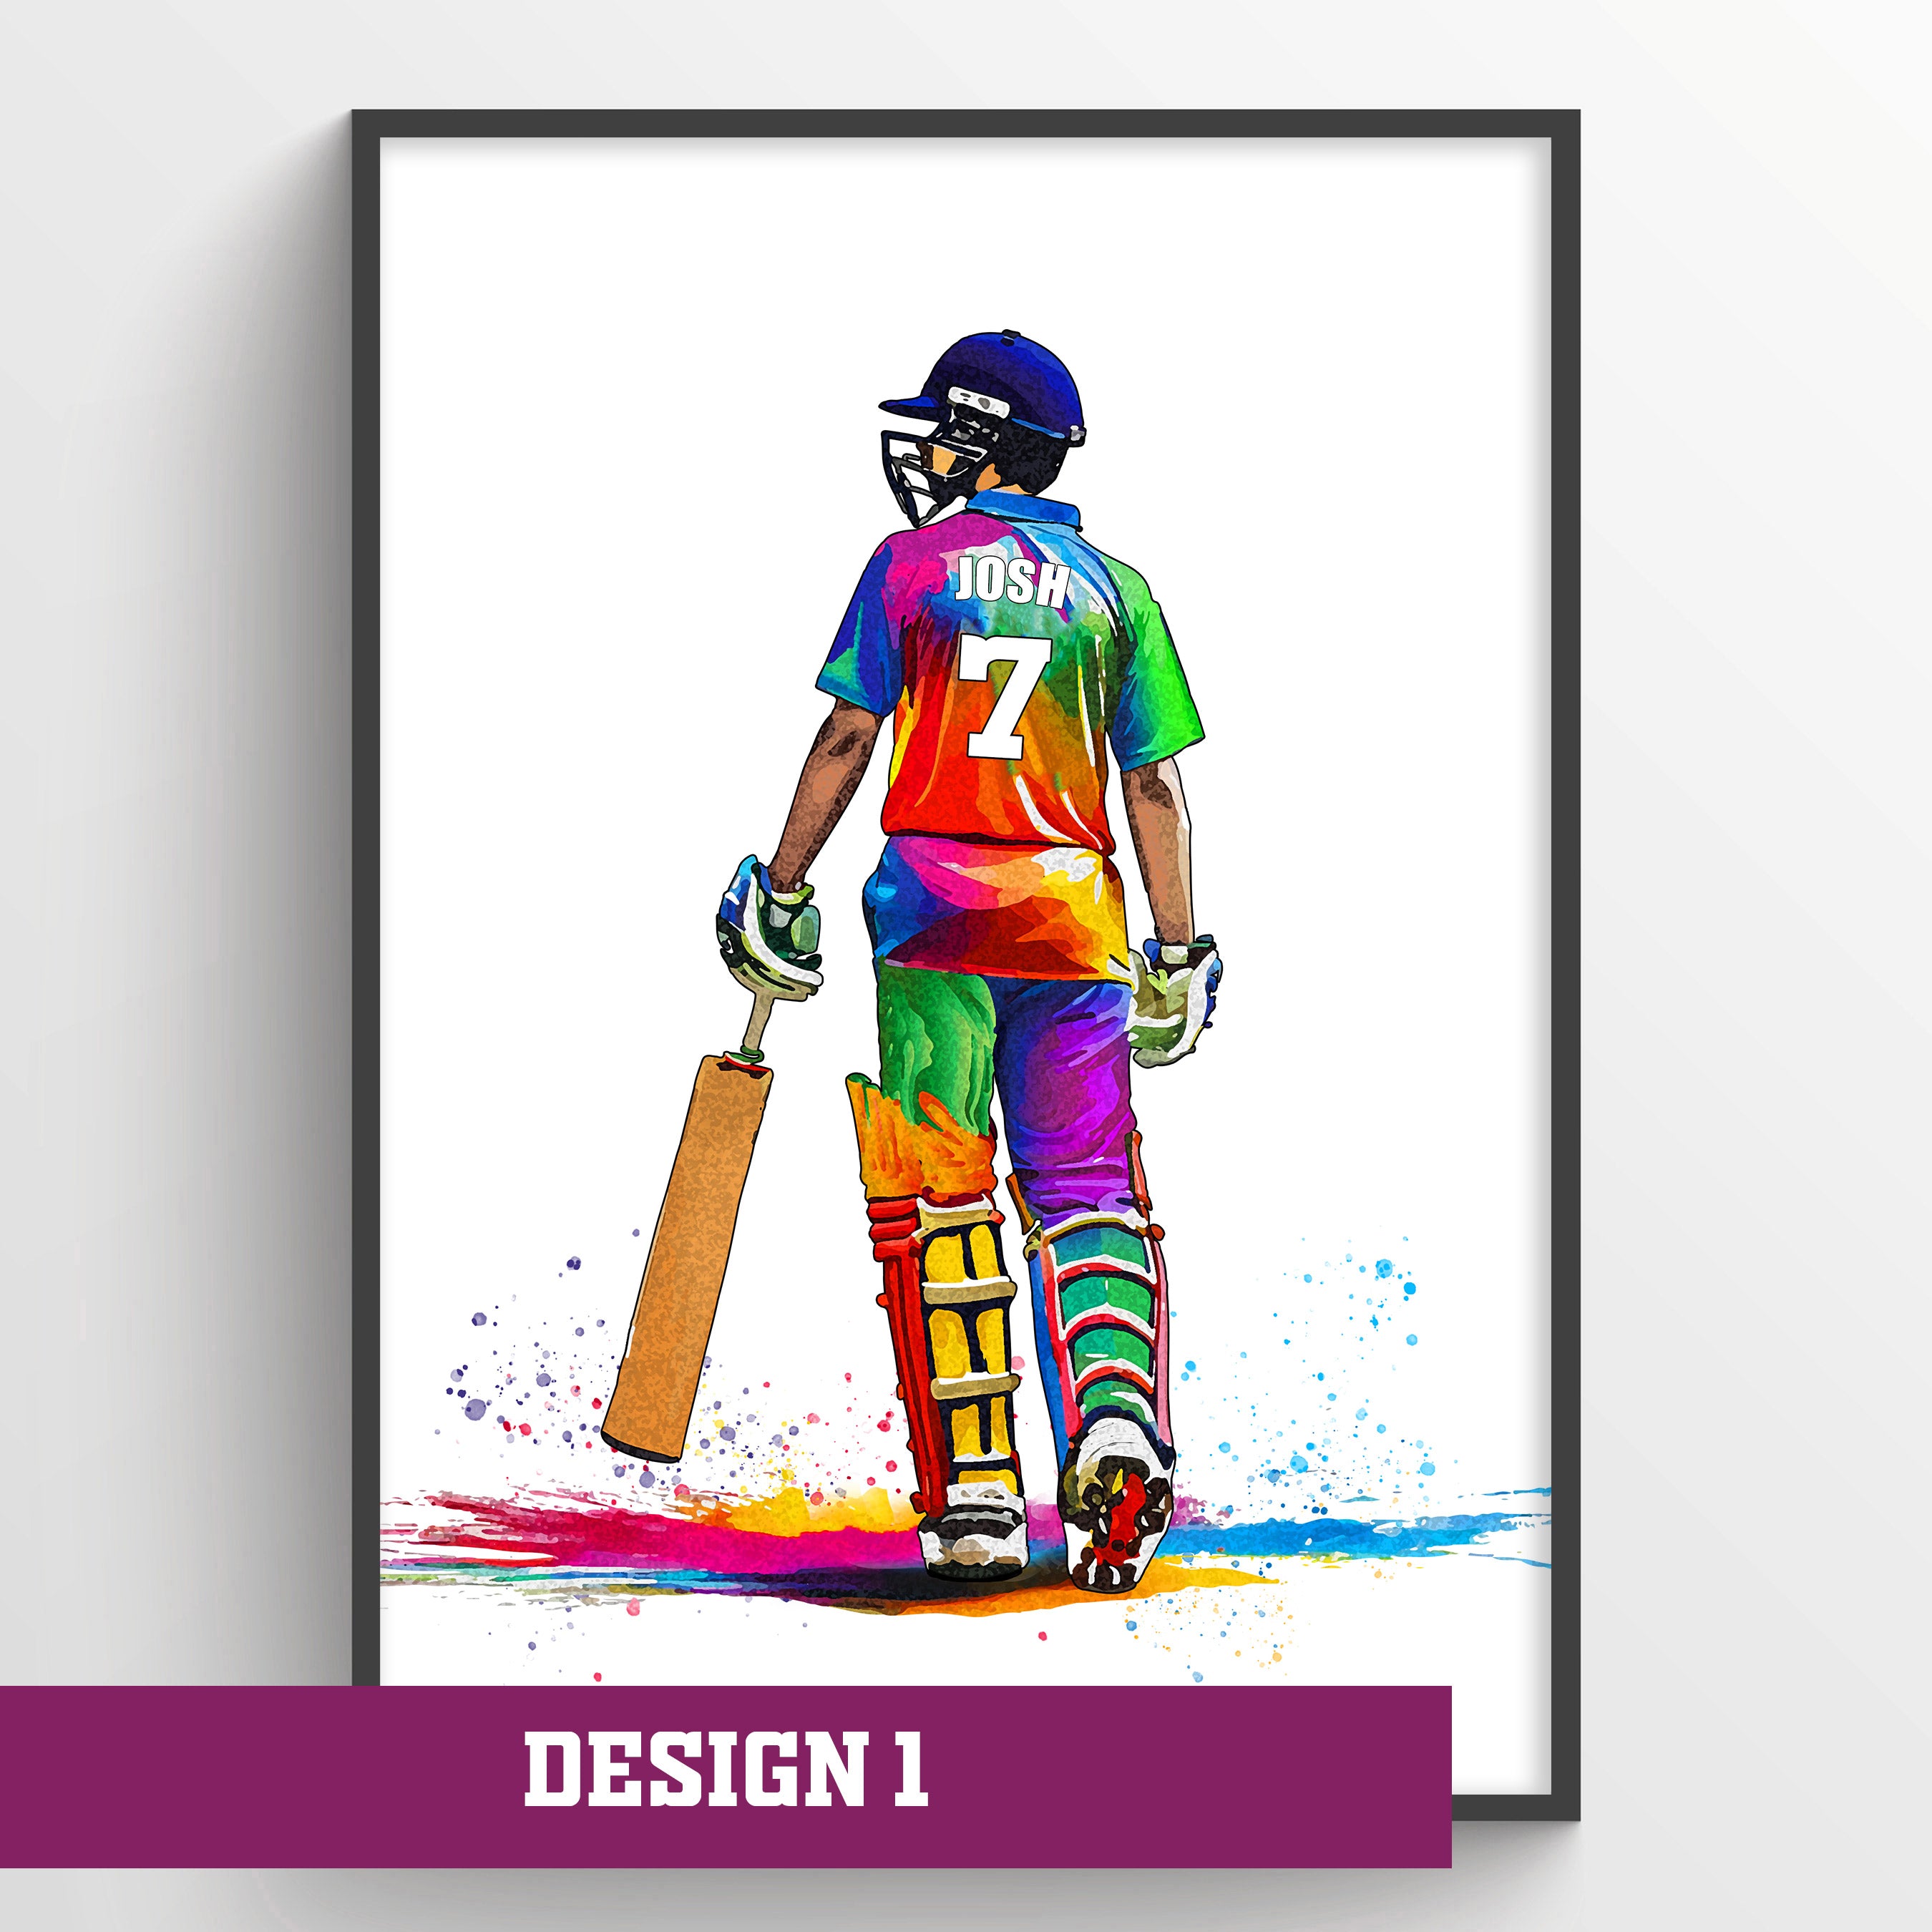 5 GREAT GIFTS FOR THE CRICKET PASSIONATE - THE GAME